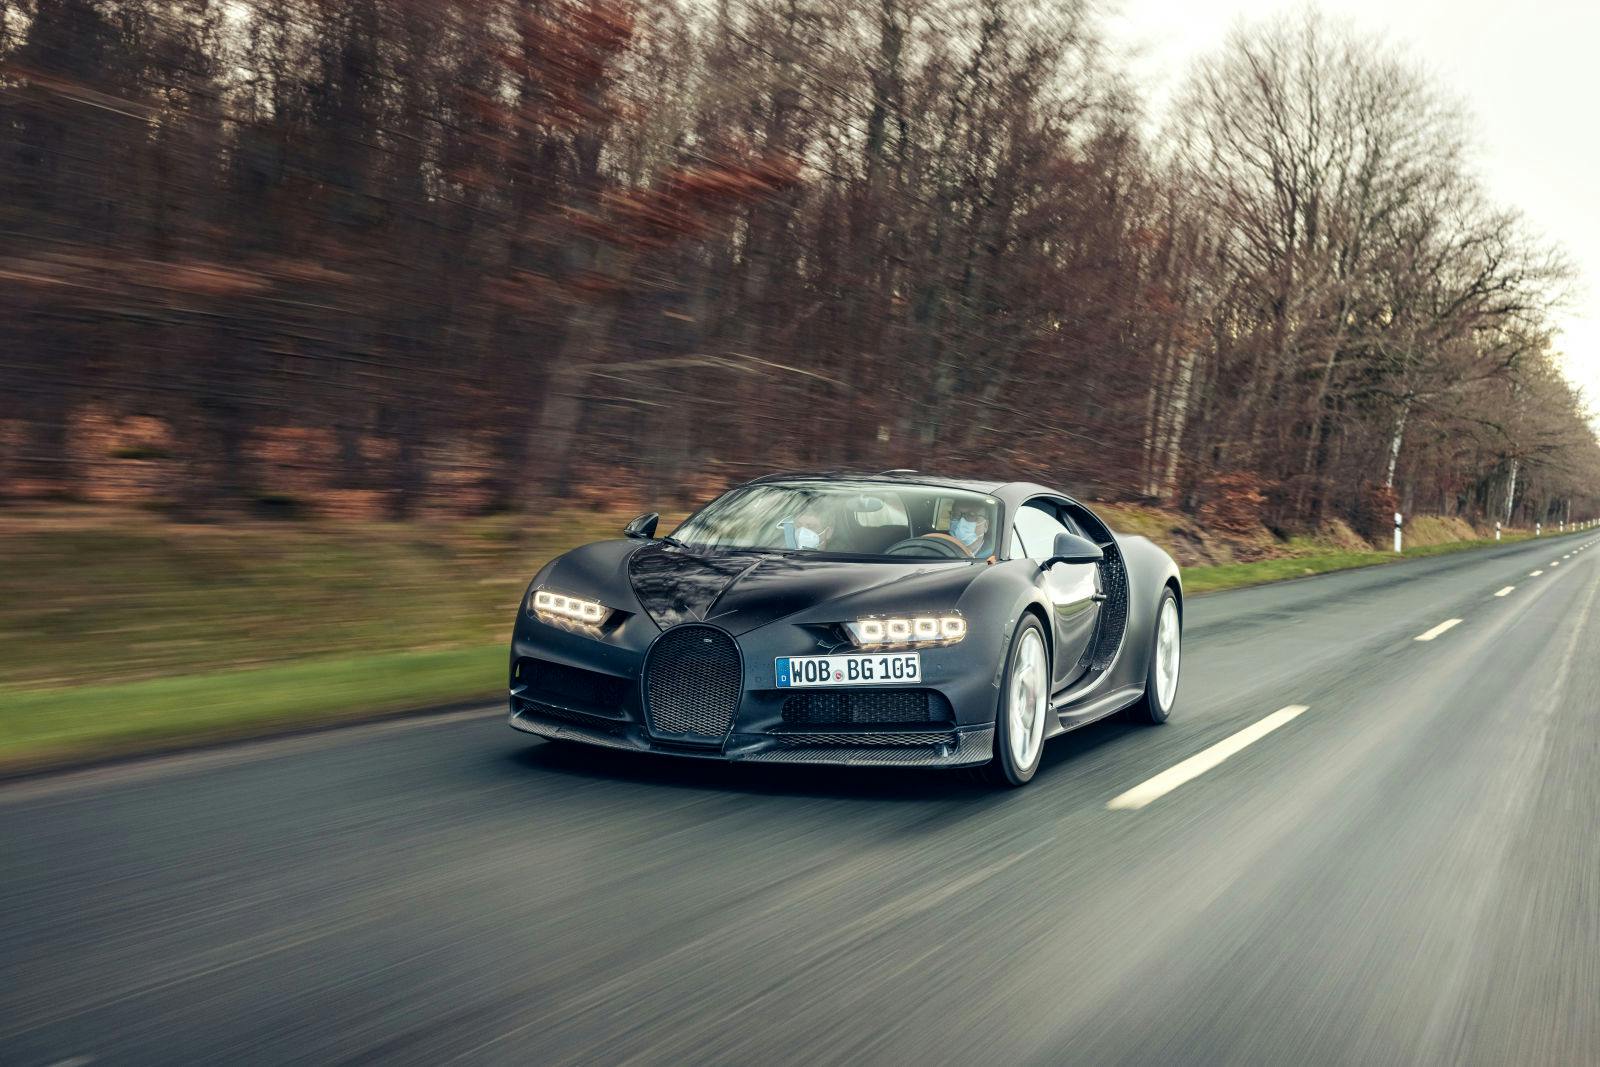 The Bugatti Chiron 4-005 – An exceptional prototype.